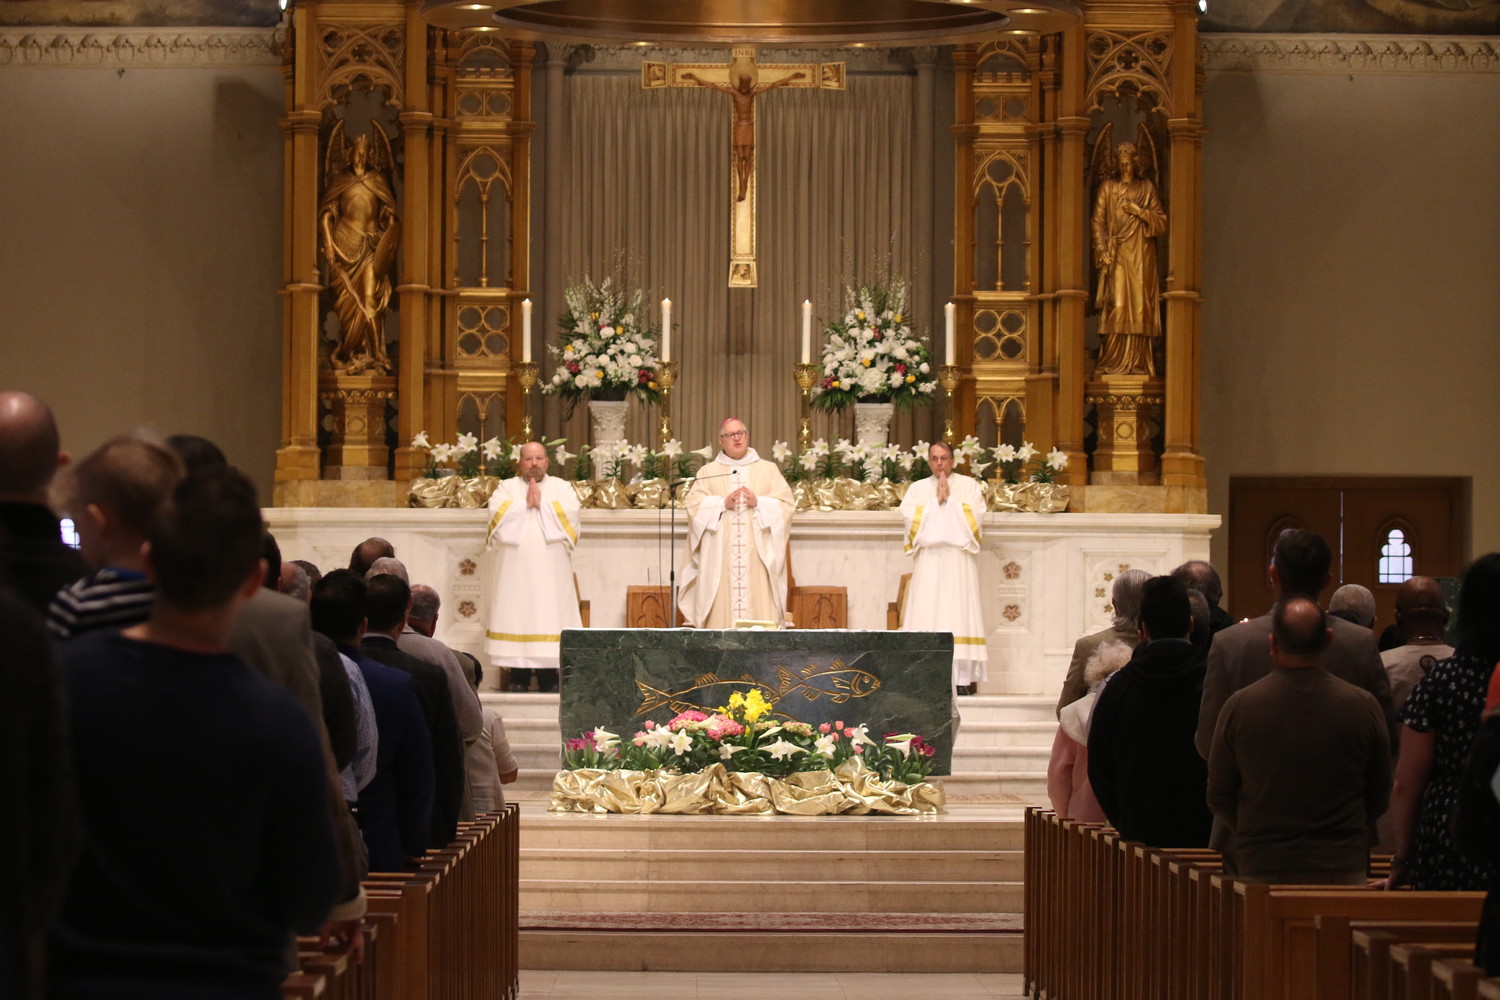 Bishop Thomas J. Tobin celebrates Easter Sunday Mass at the Cathedral of SS. Peter and Paul in Providence.